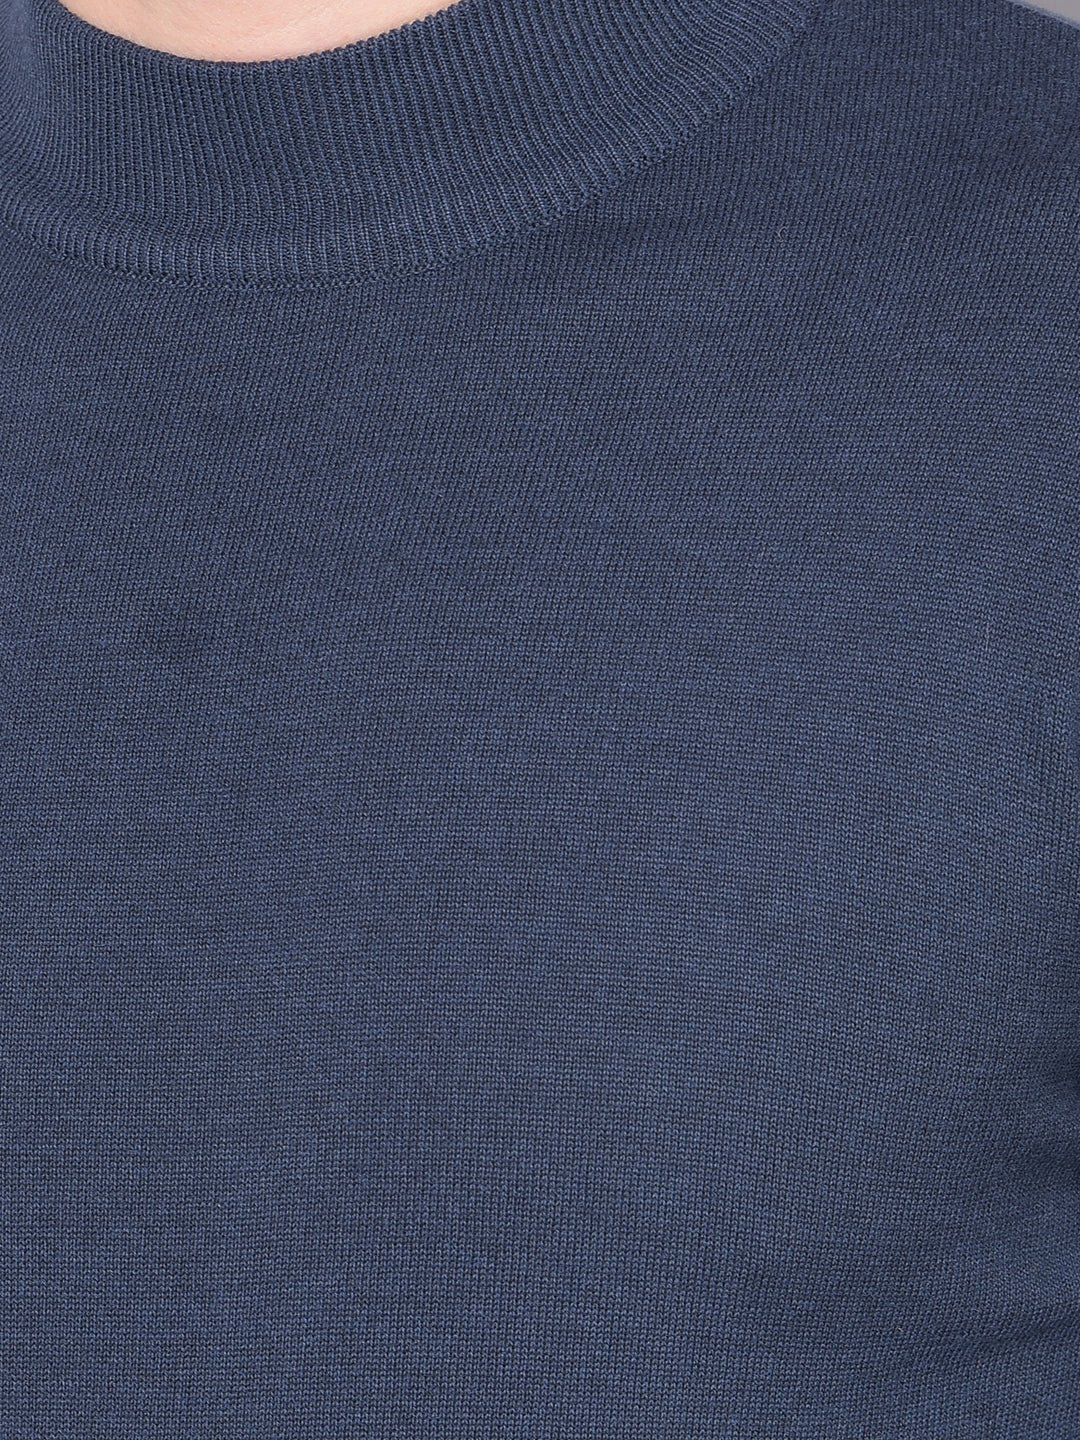 COBB SOLID NAVY BLUE HIGH NECK SWEATER